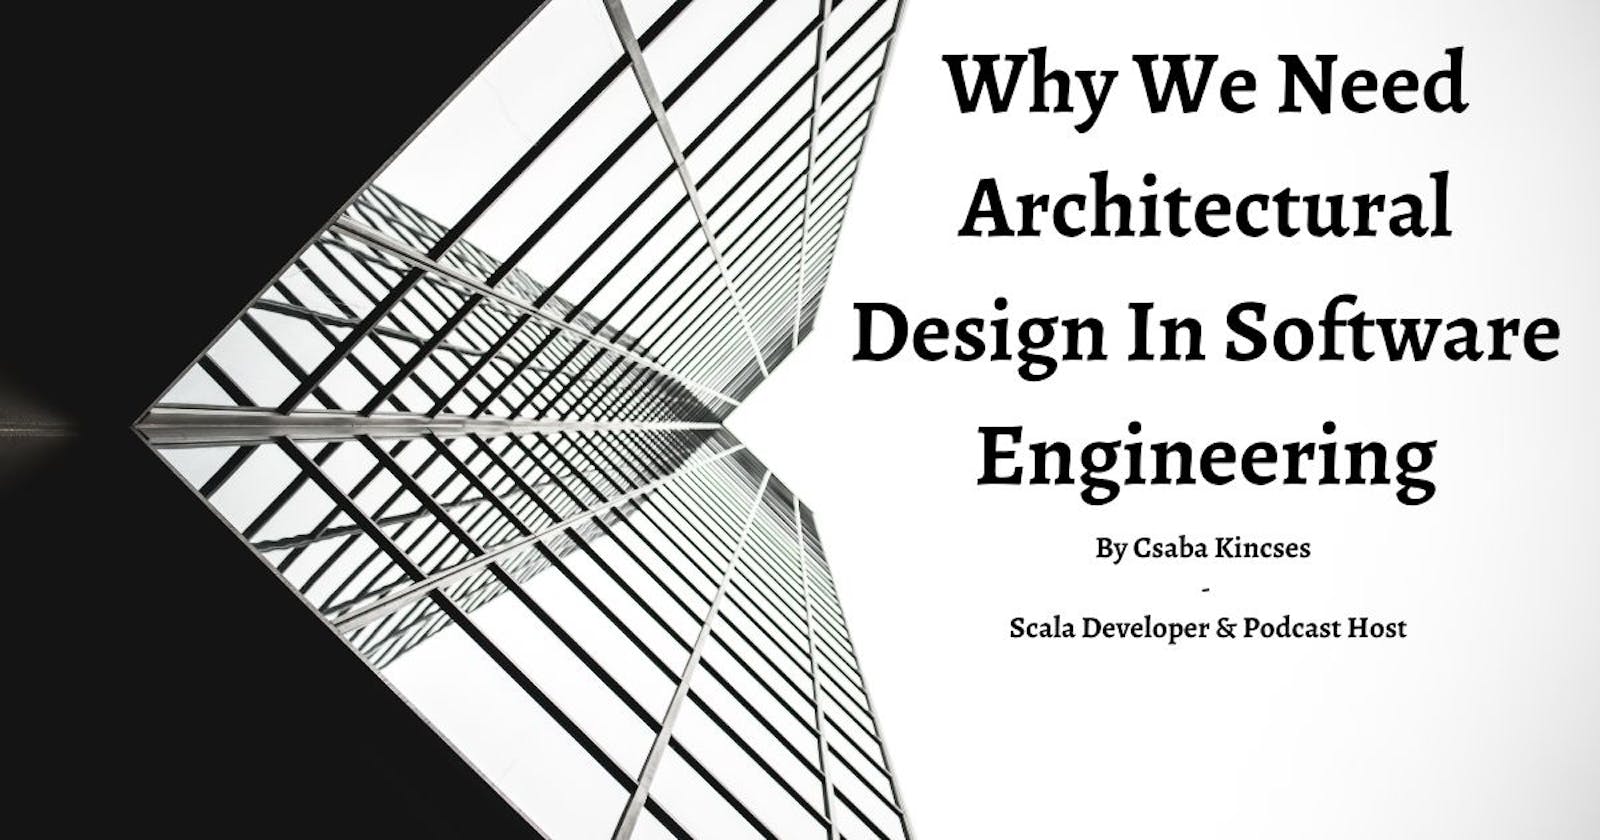 Why We Need Architectural Design In Software Engineering